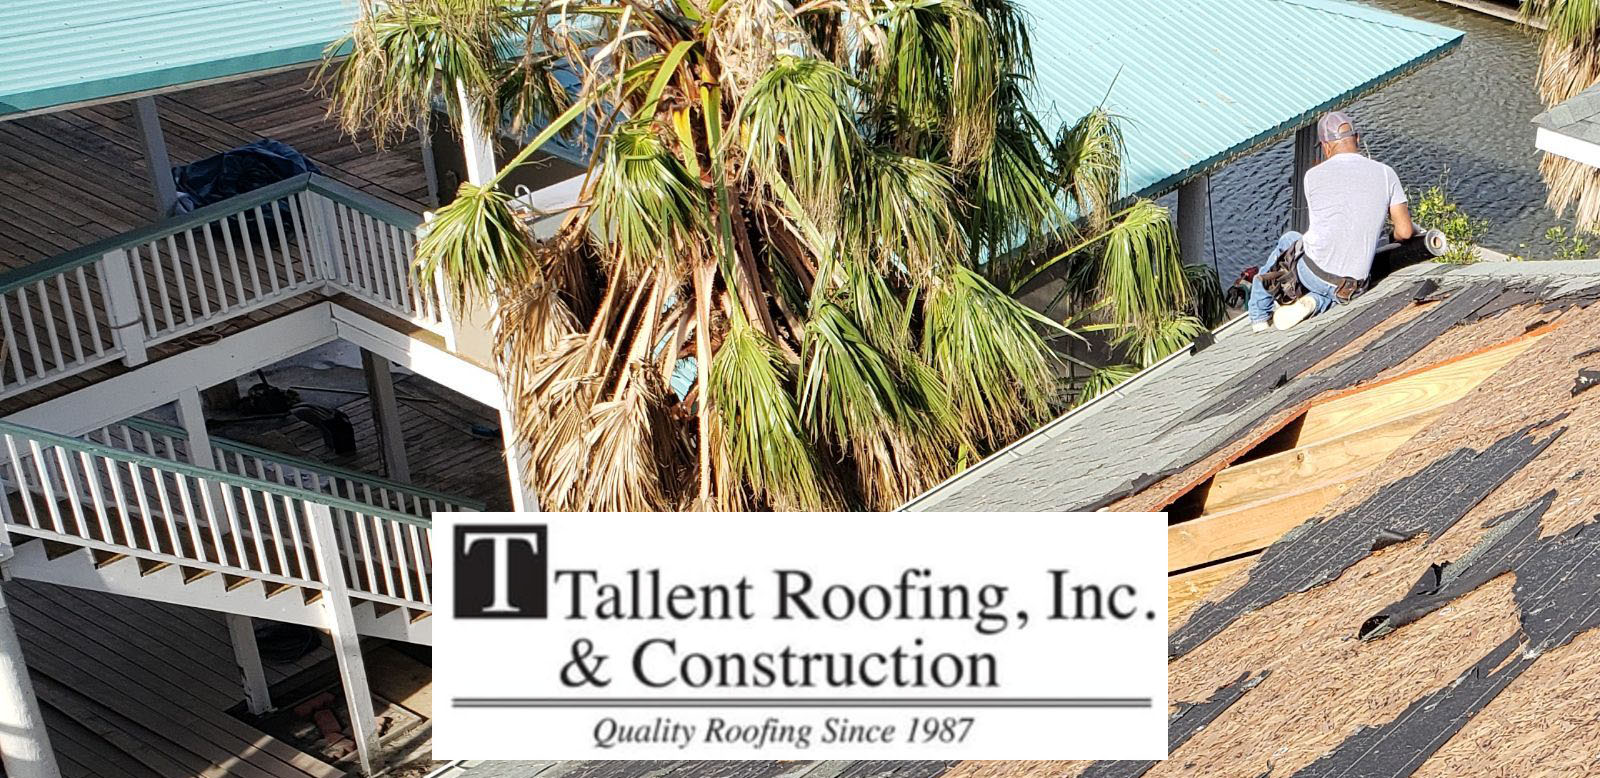 Tallent Roofing, Inc.